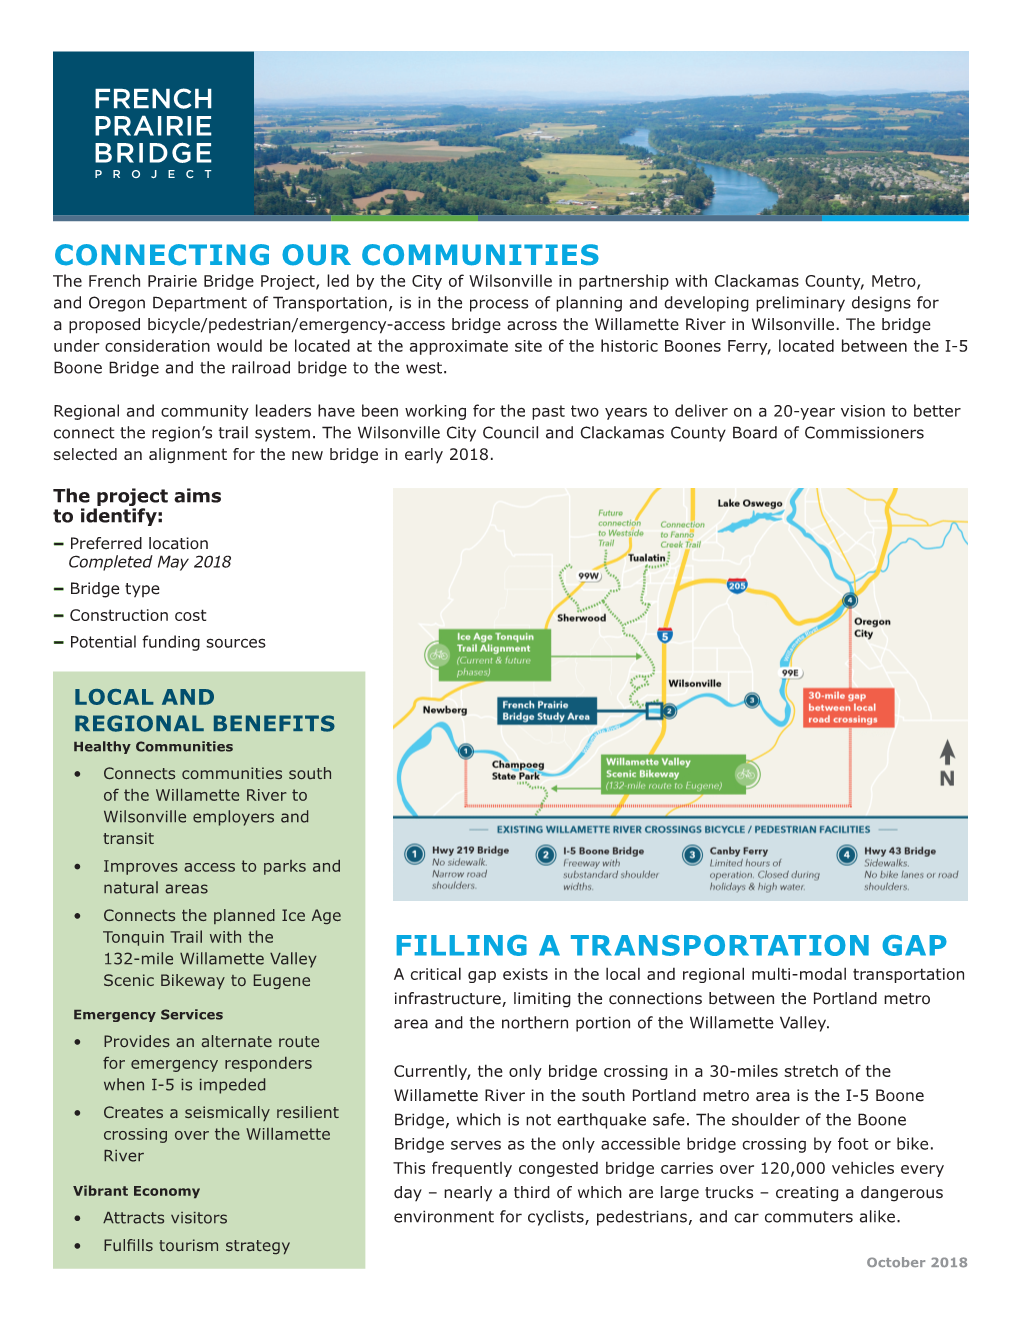 Filling a Transportation Gap Connecting Our Communities